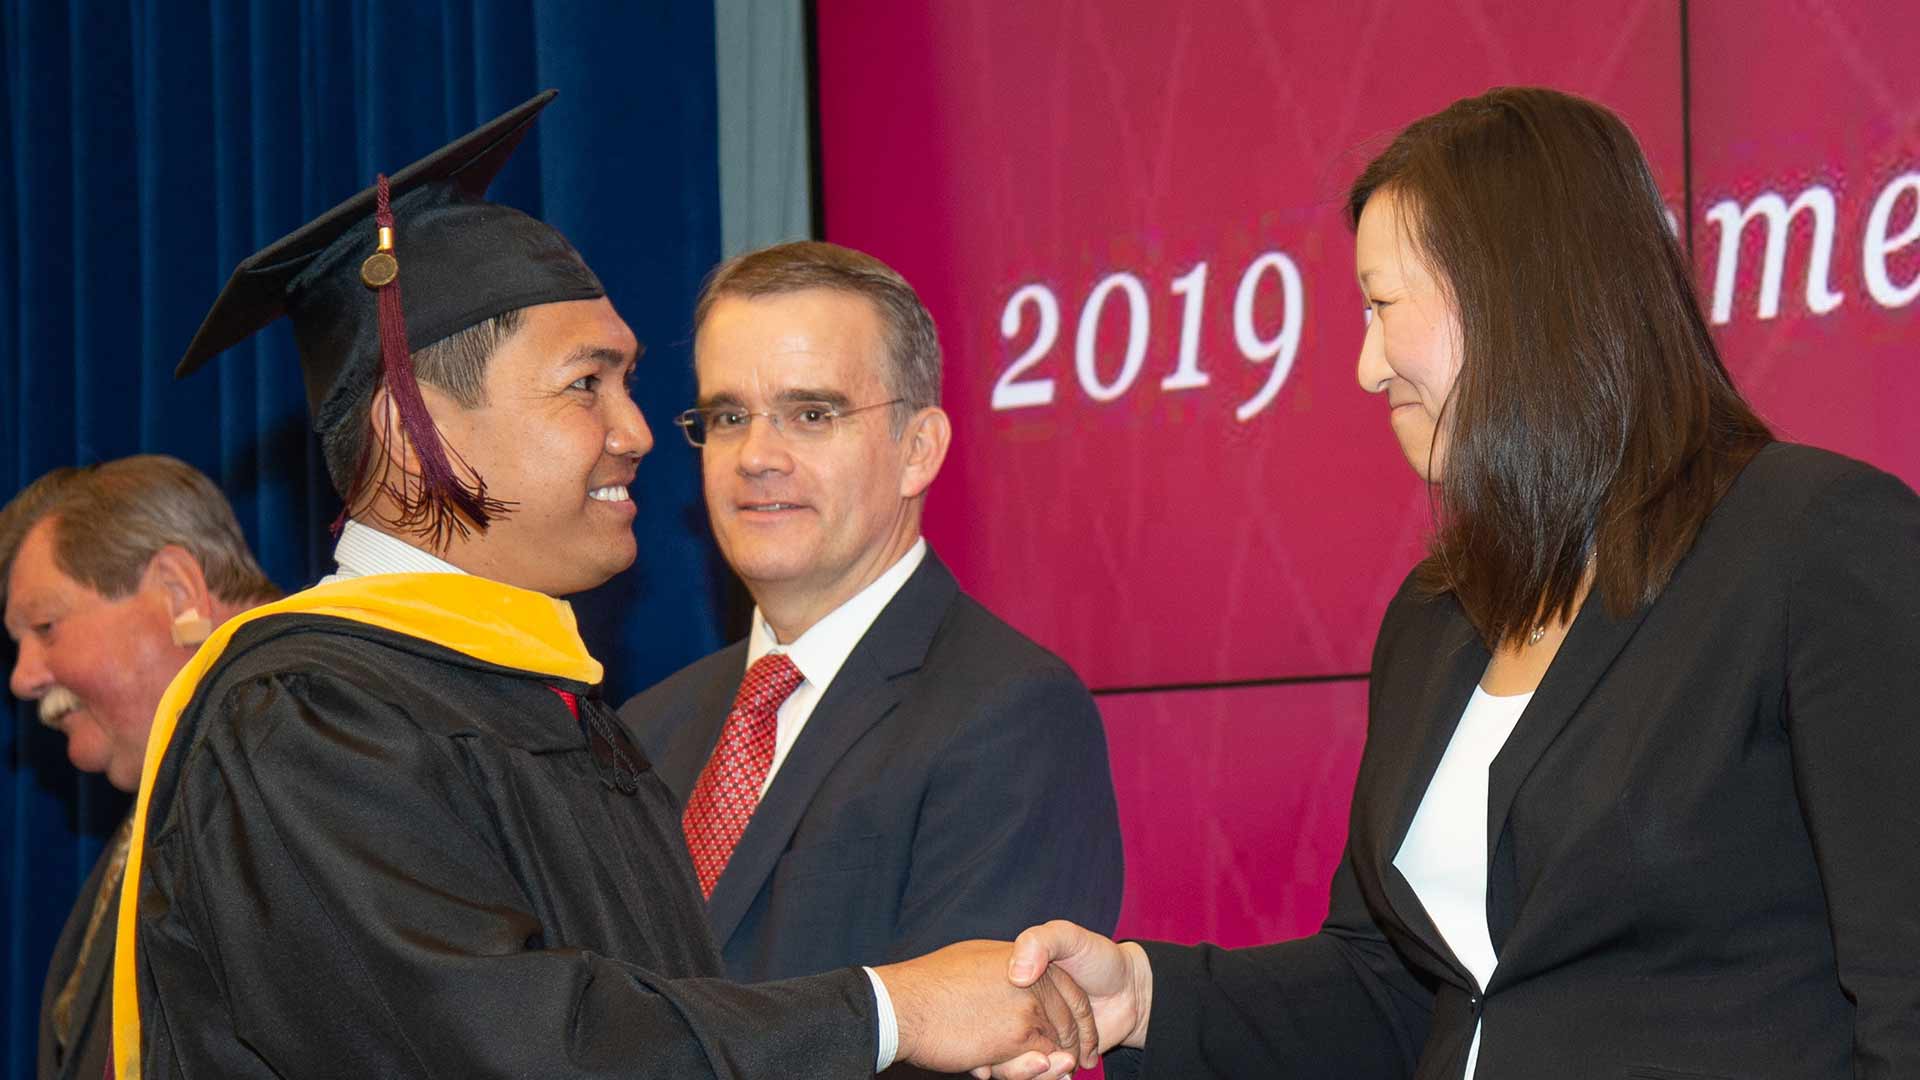 DSS student Las Bryner receives congratulations from the Deputy Under Secretary of Defense for Intelligence, Kari Bingen, at the 2019 department commencement ceremony.